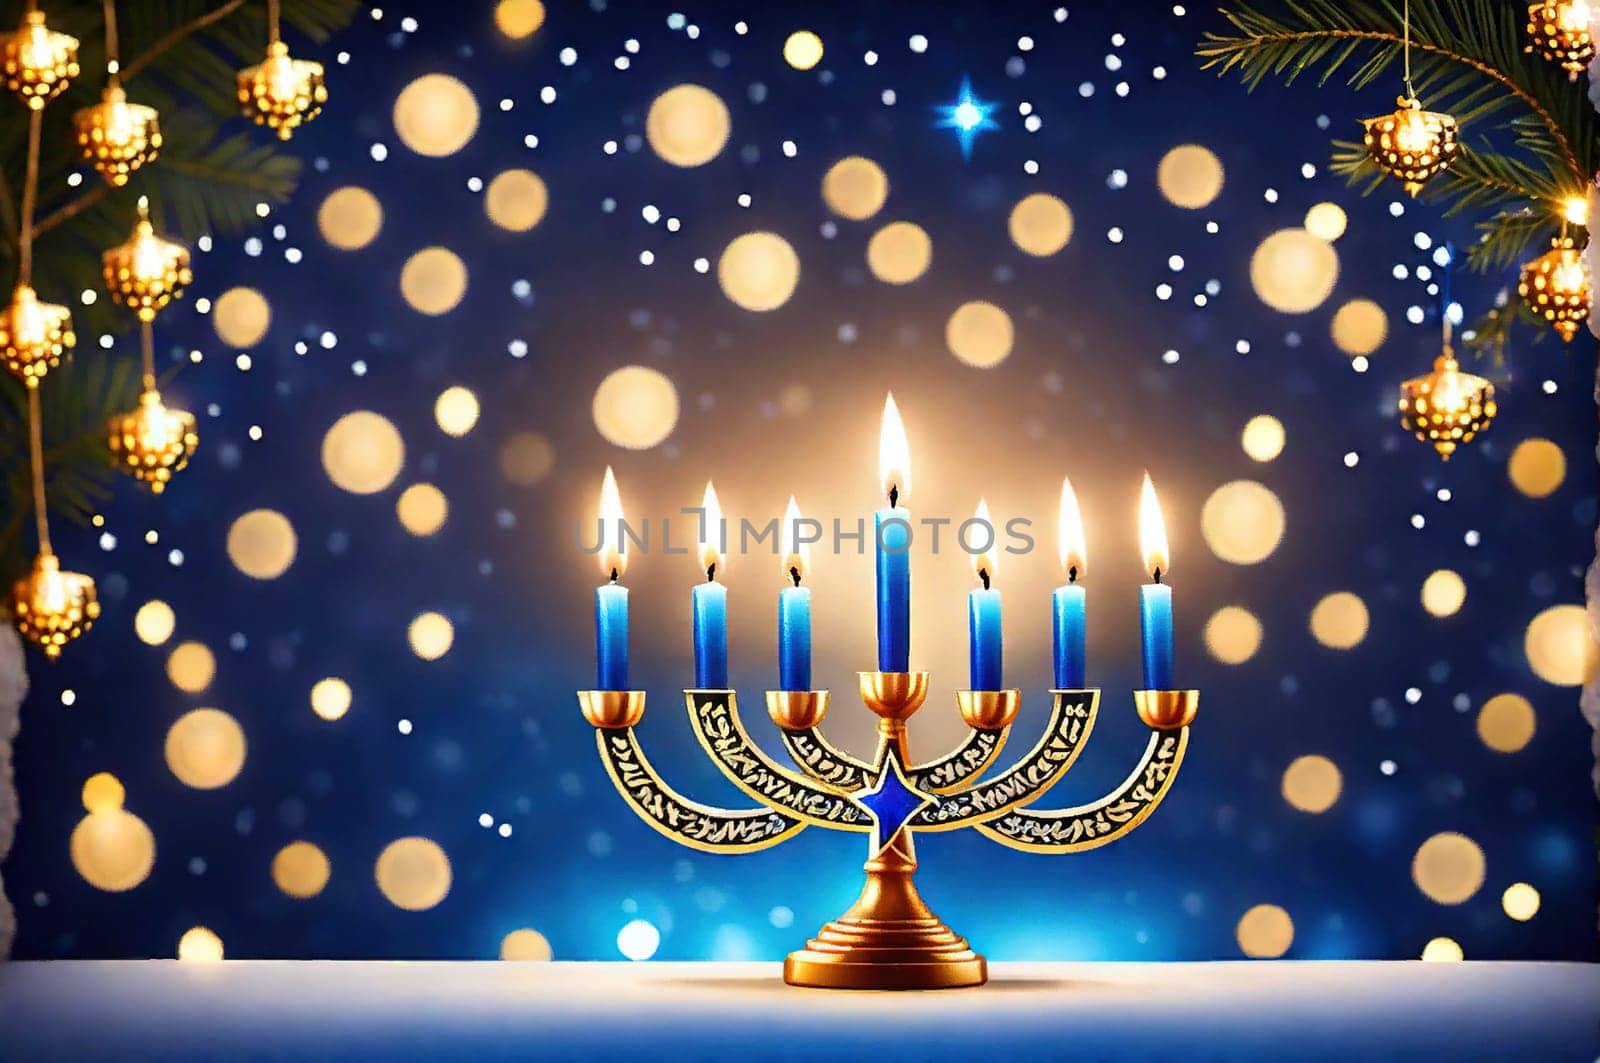 Happy Hanukkah card with beautiful and creative symbols on colorful holiday background for Jewish holiday Hanukkah